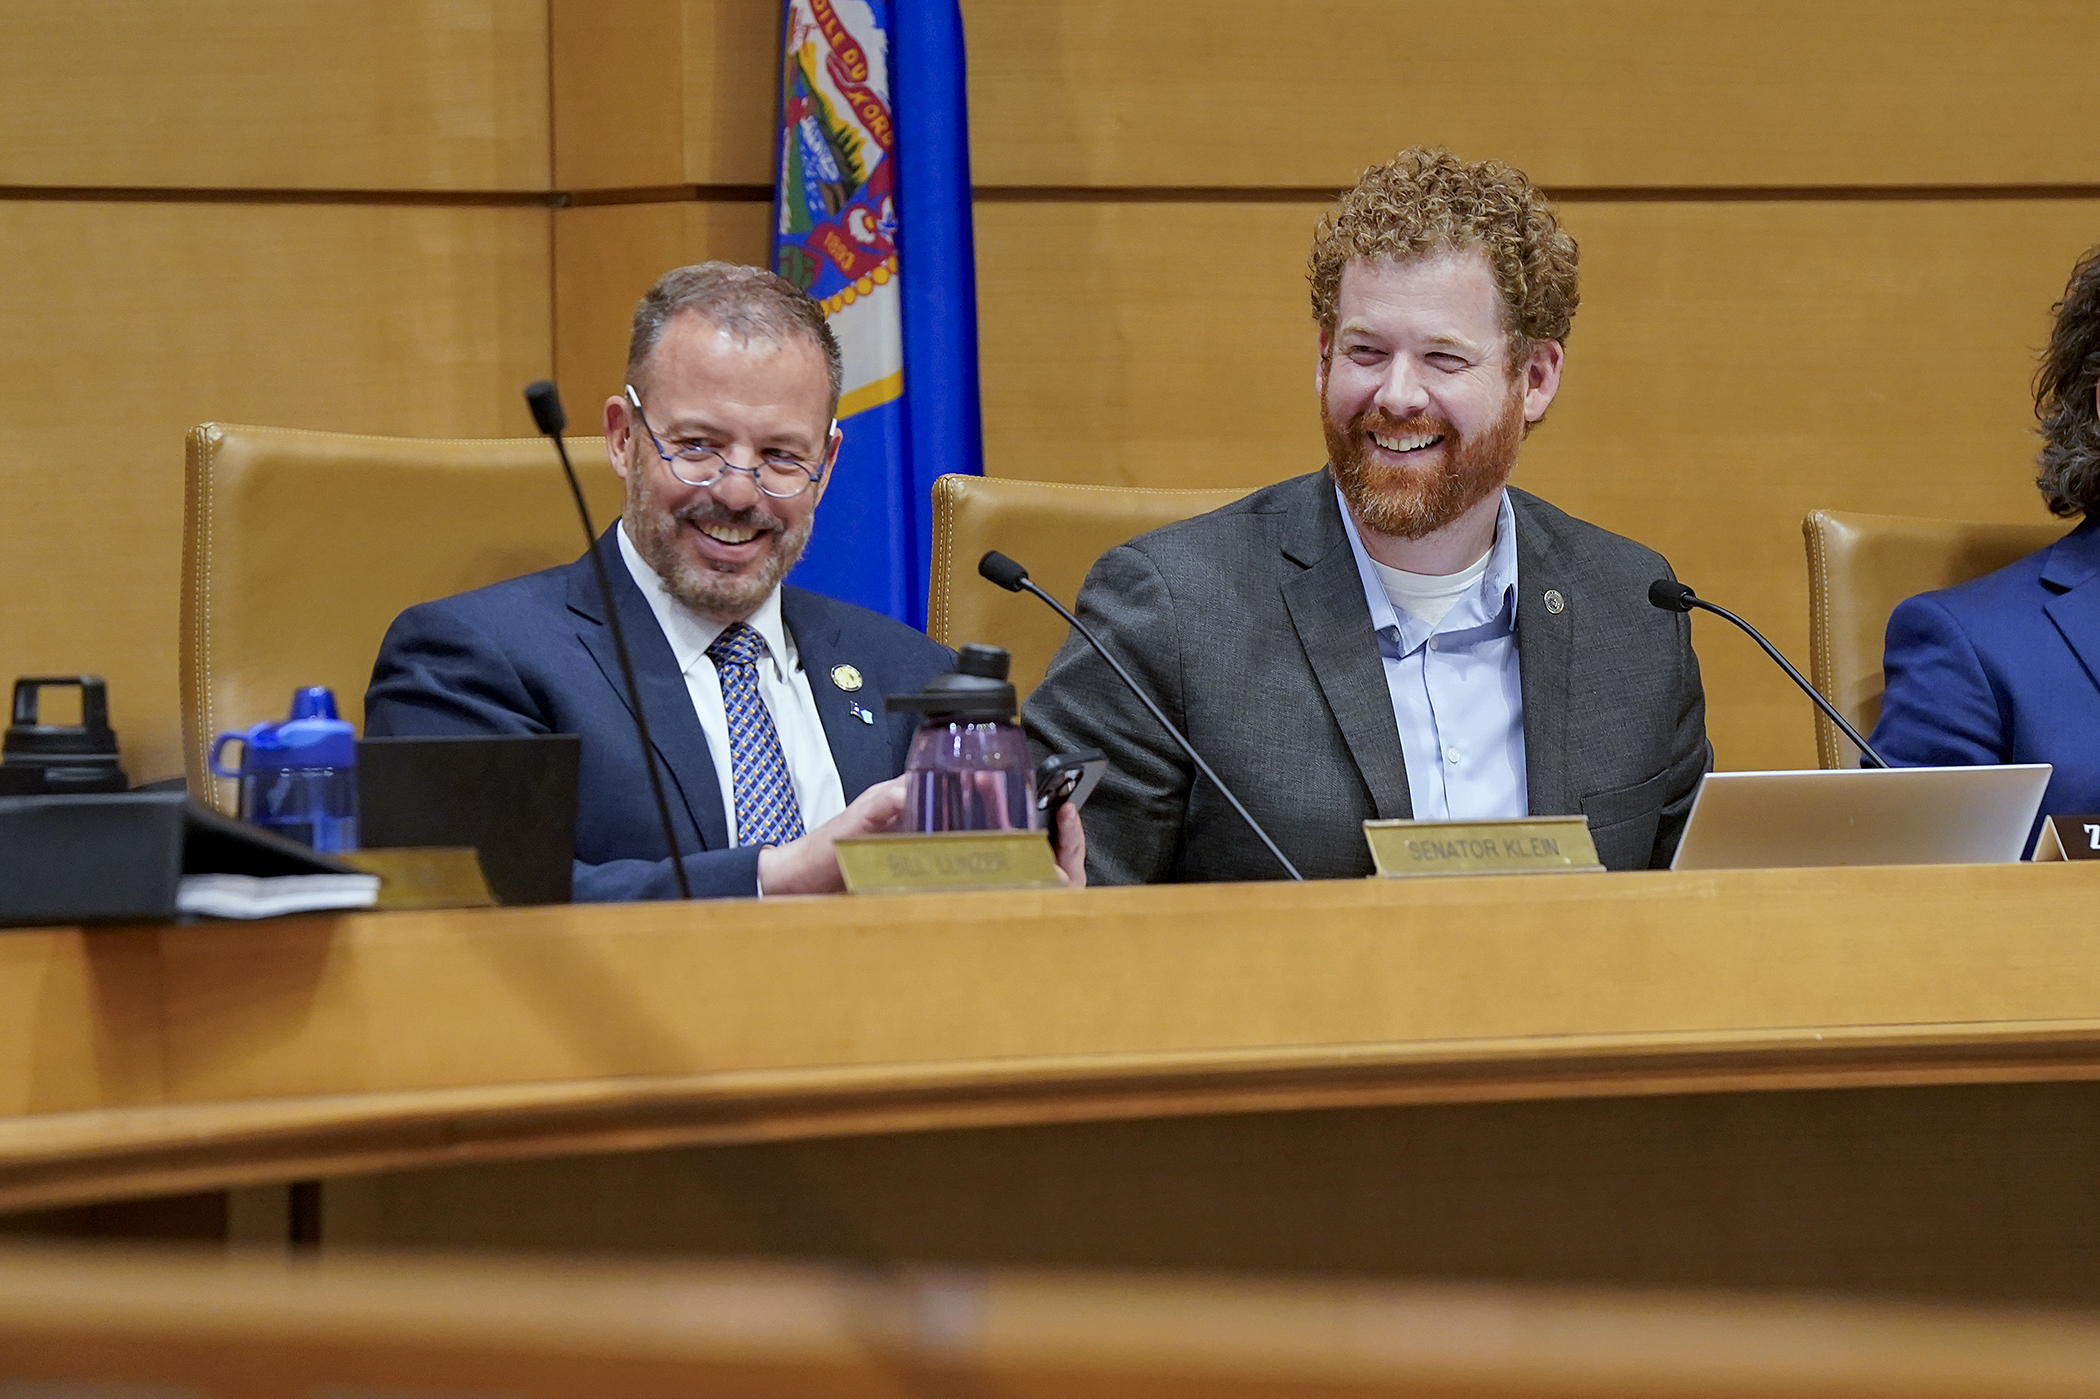 Sen. Matt Klein and Rep. Zack Stephenson share a laugh before convening the commerce conference committee May 8. (Photo by Michele Jokinen)